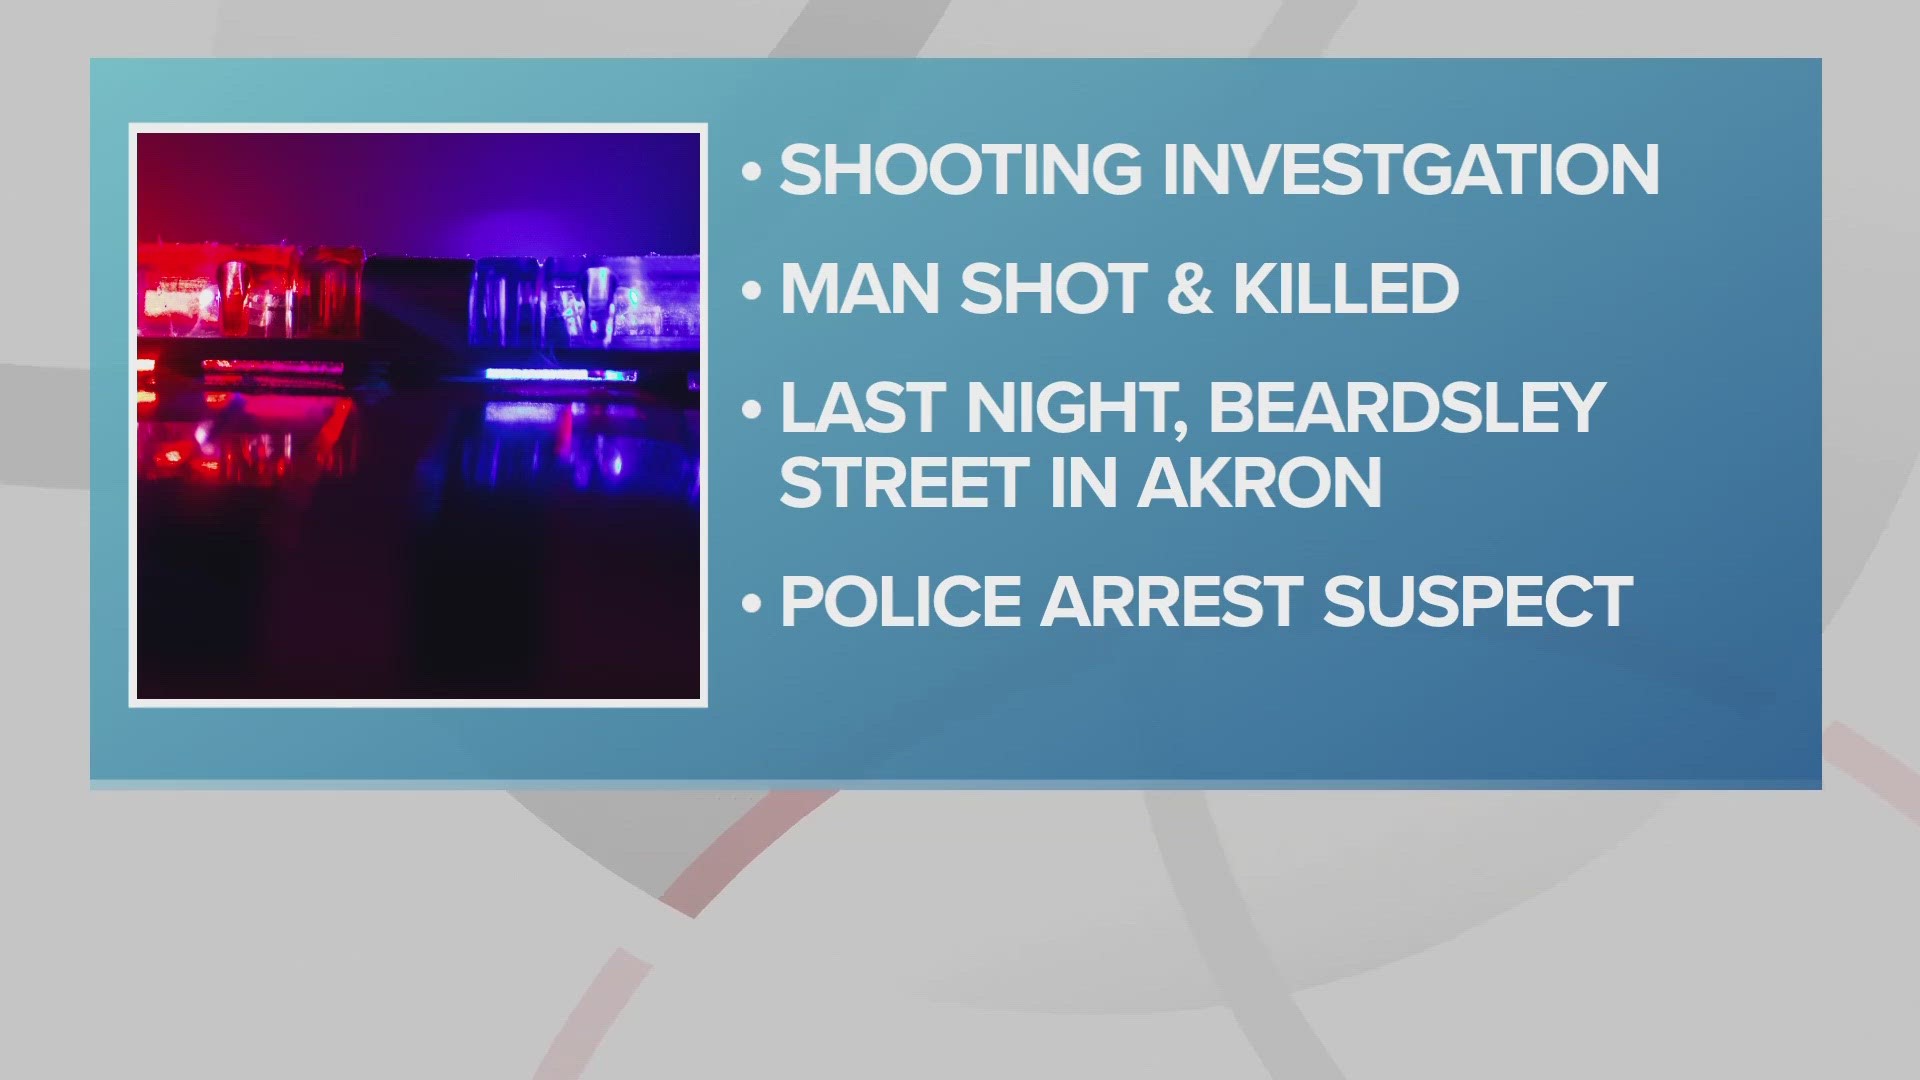 Investigators believe that the shooting stemmed from an altercation between the two men earlier in the week.